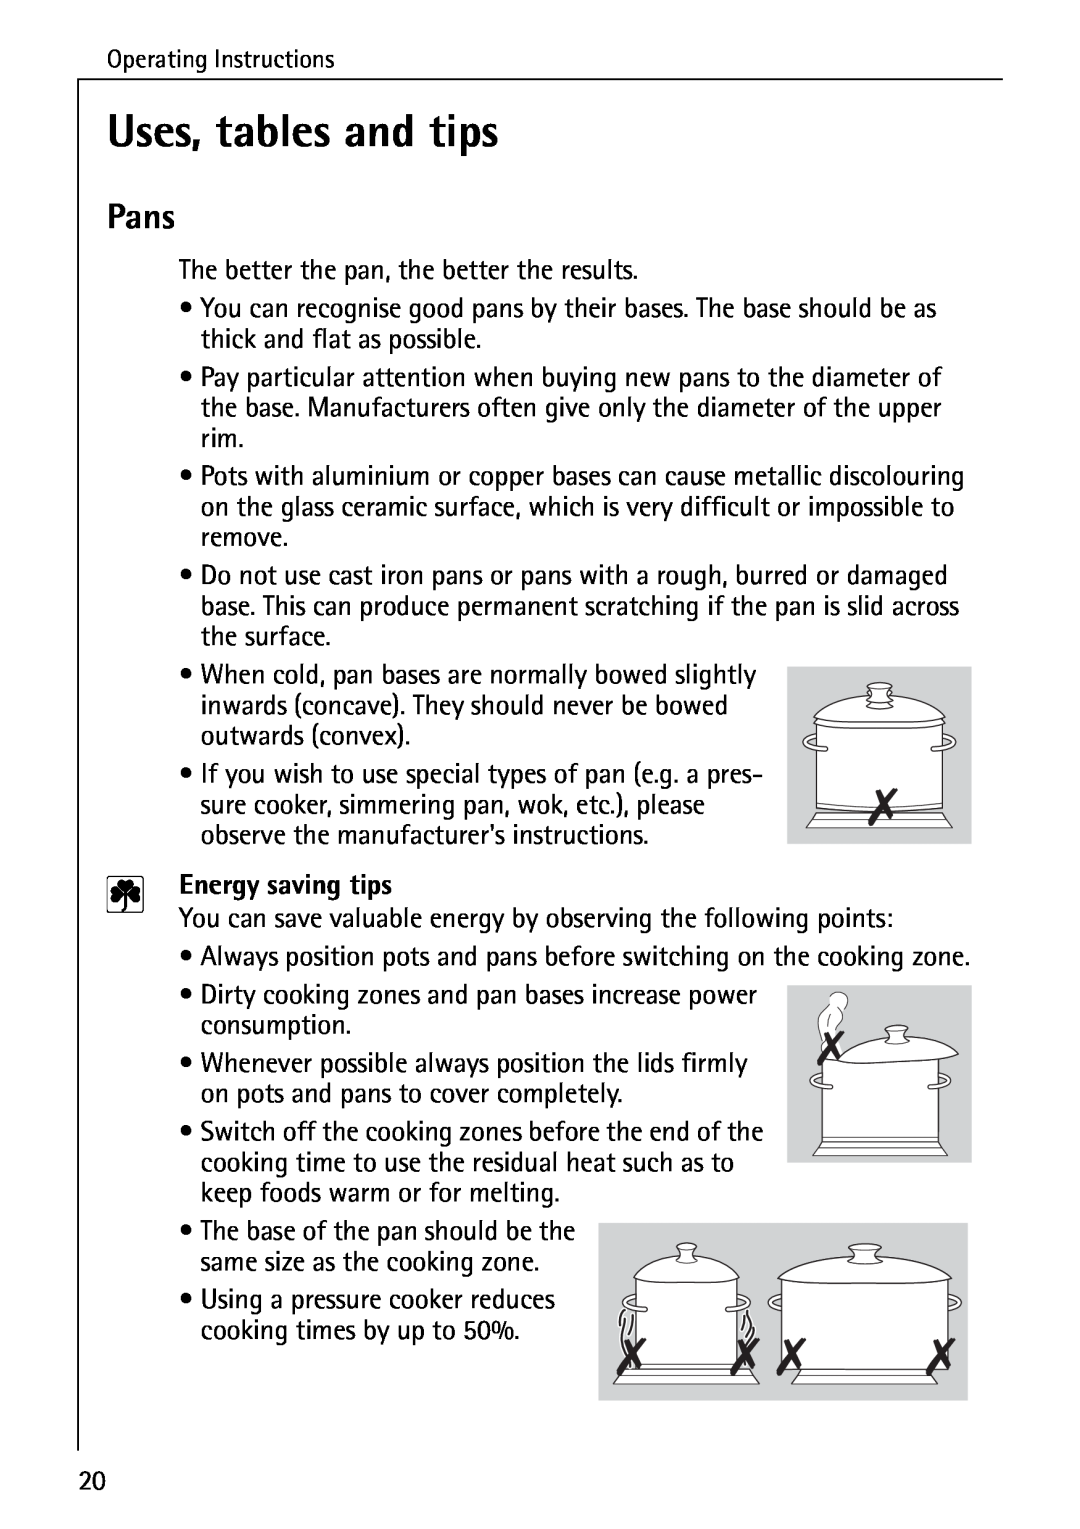 Electrolux C65030K operating instructions Uses, tables and tips, Pans, Energy saving tips 